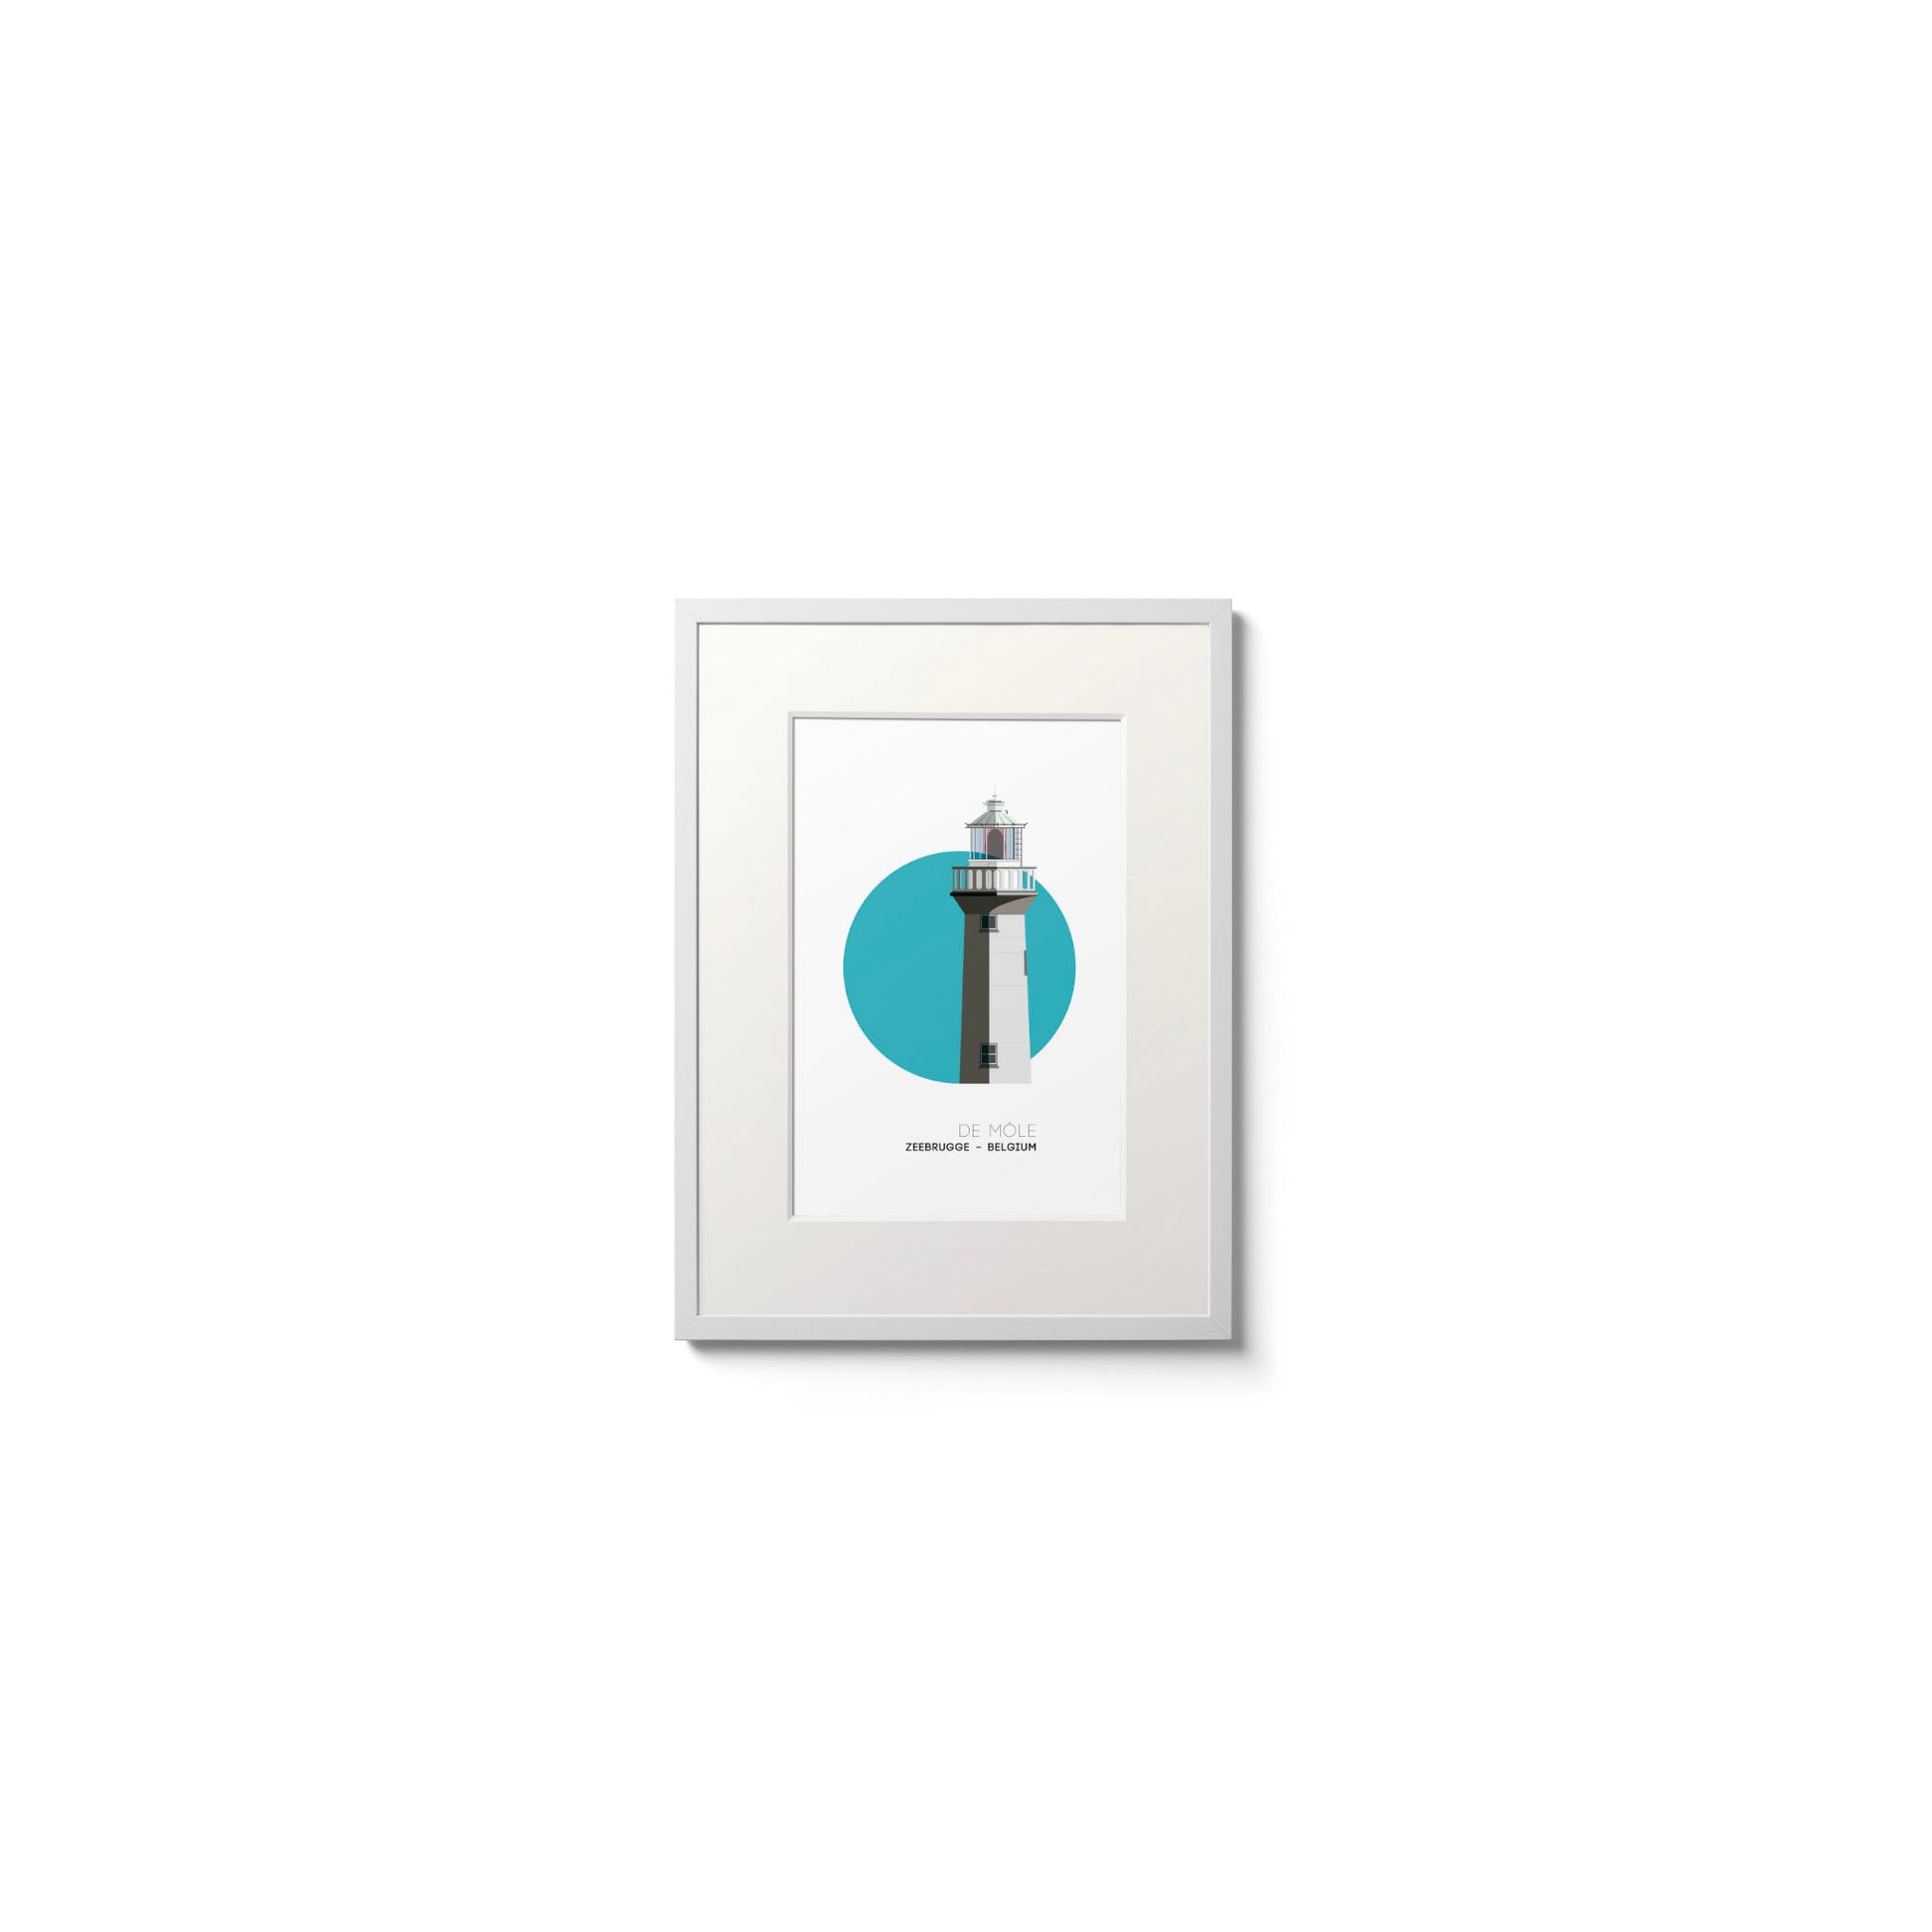 De Môle lighthouse, Zeebrugge Belgium. On a white background with aqua blue circle as a backdrop, framed and measuring 15x20cm.